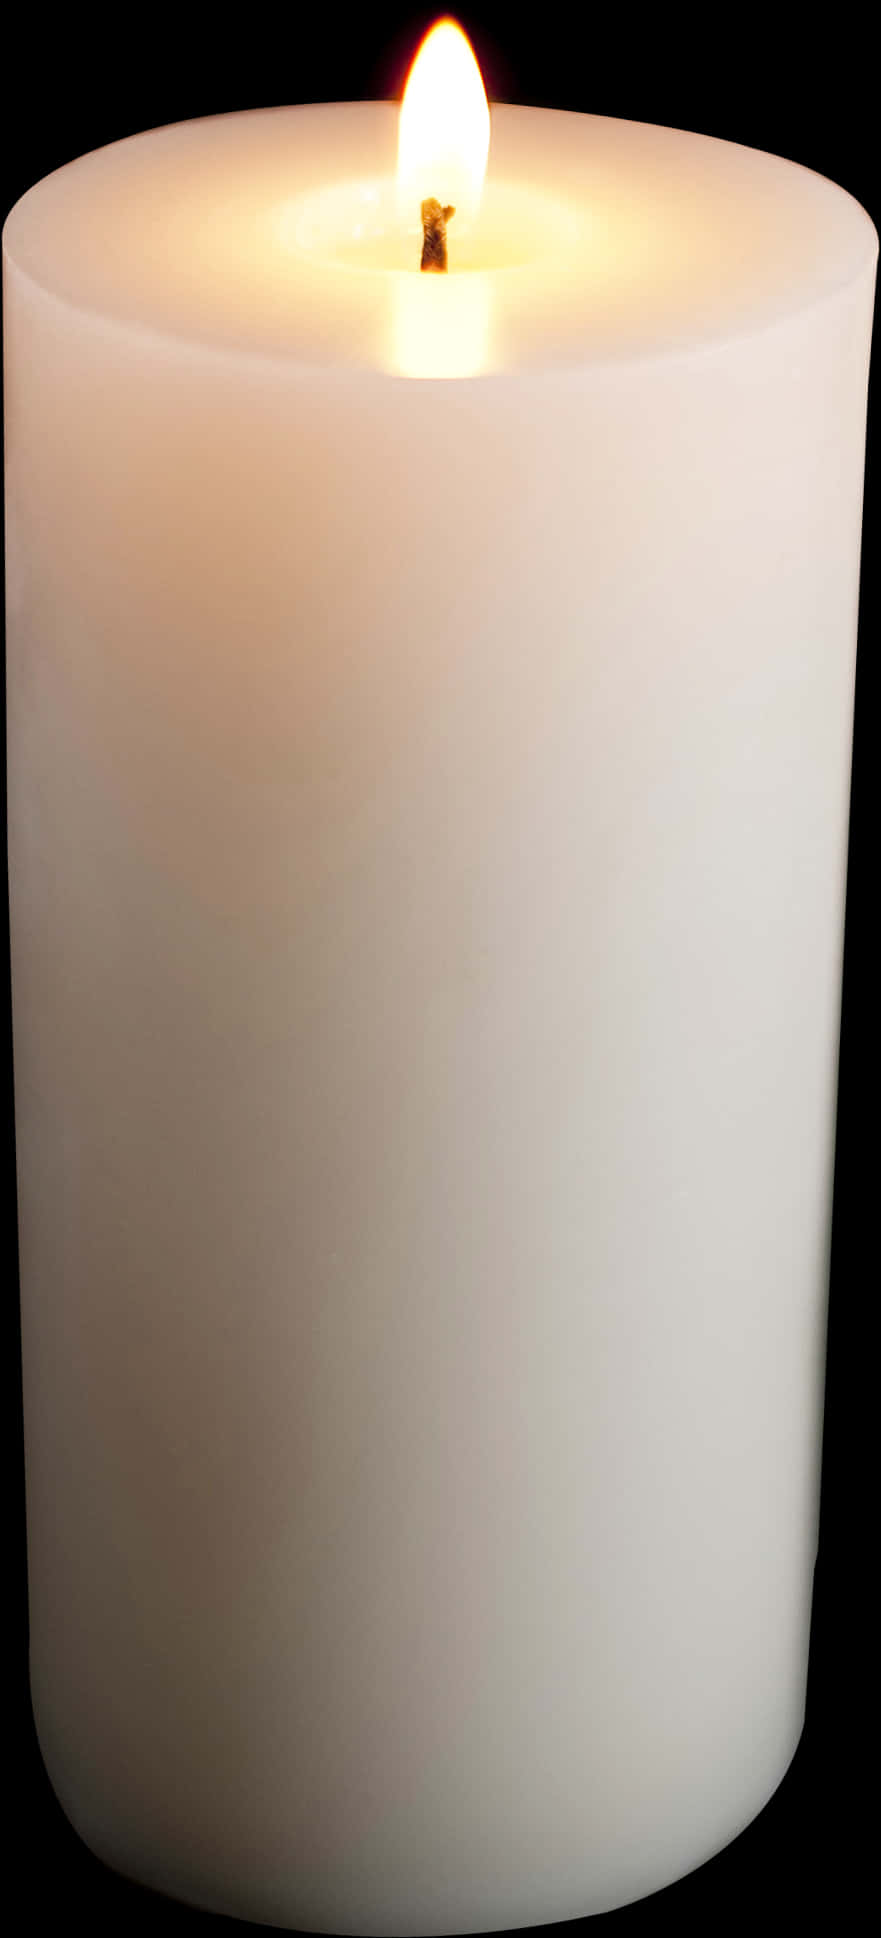 A White Candle With A Black Background